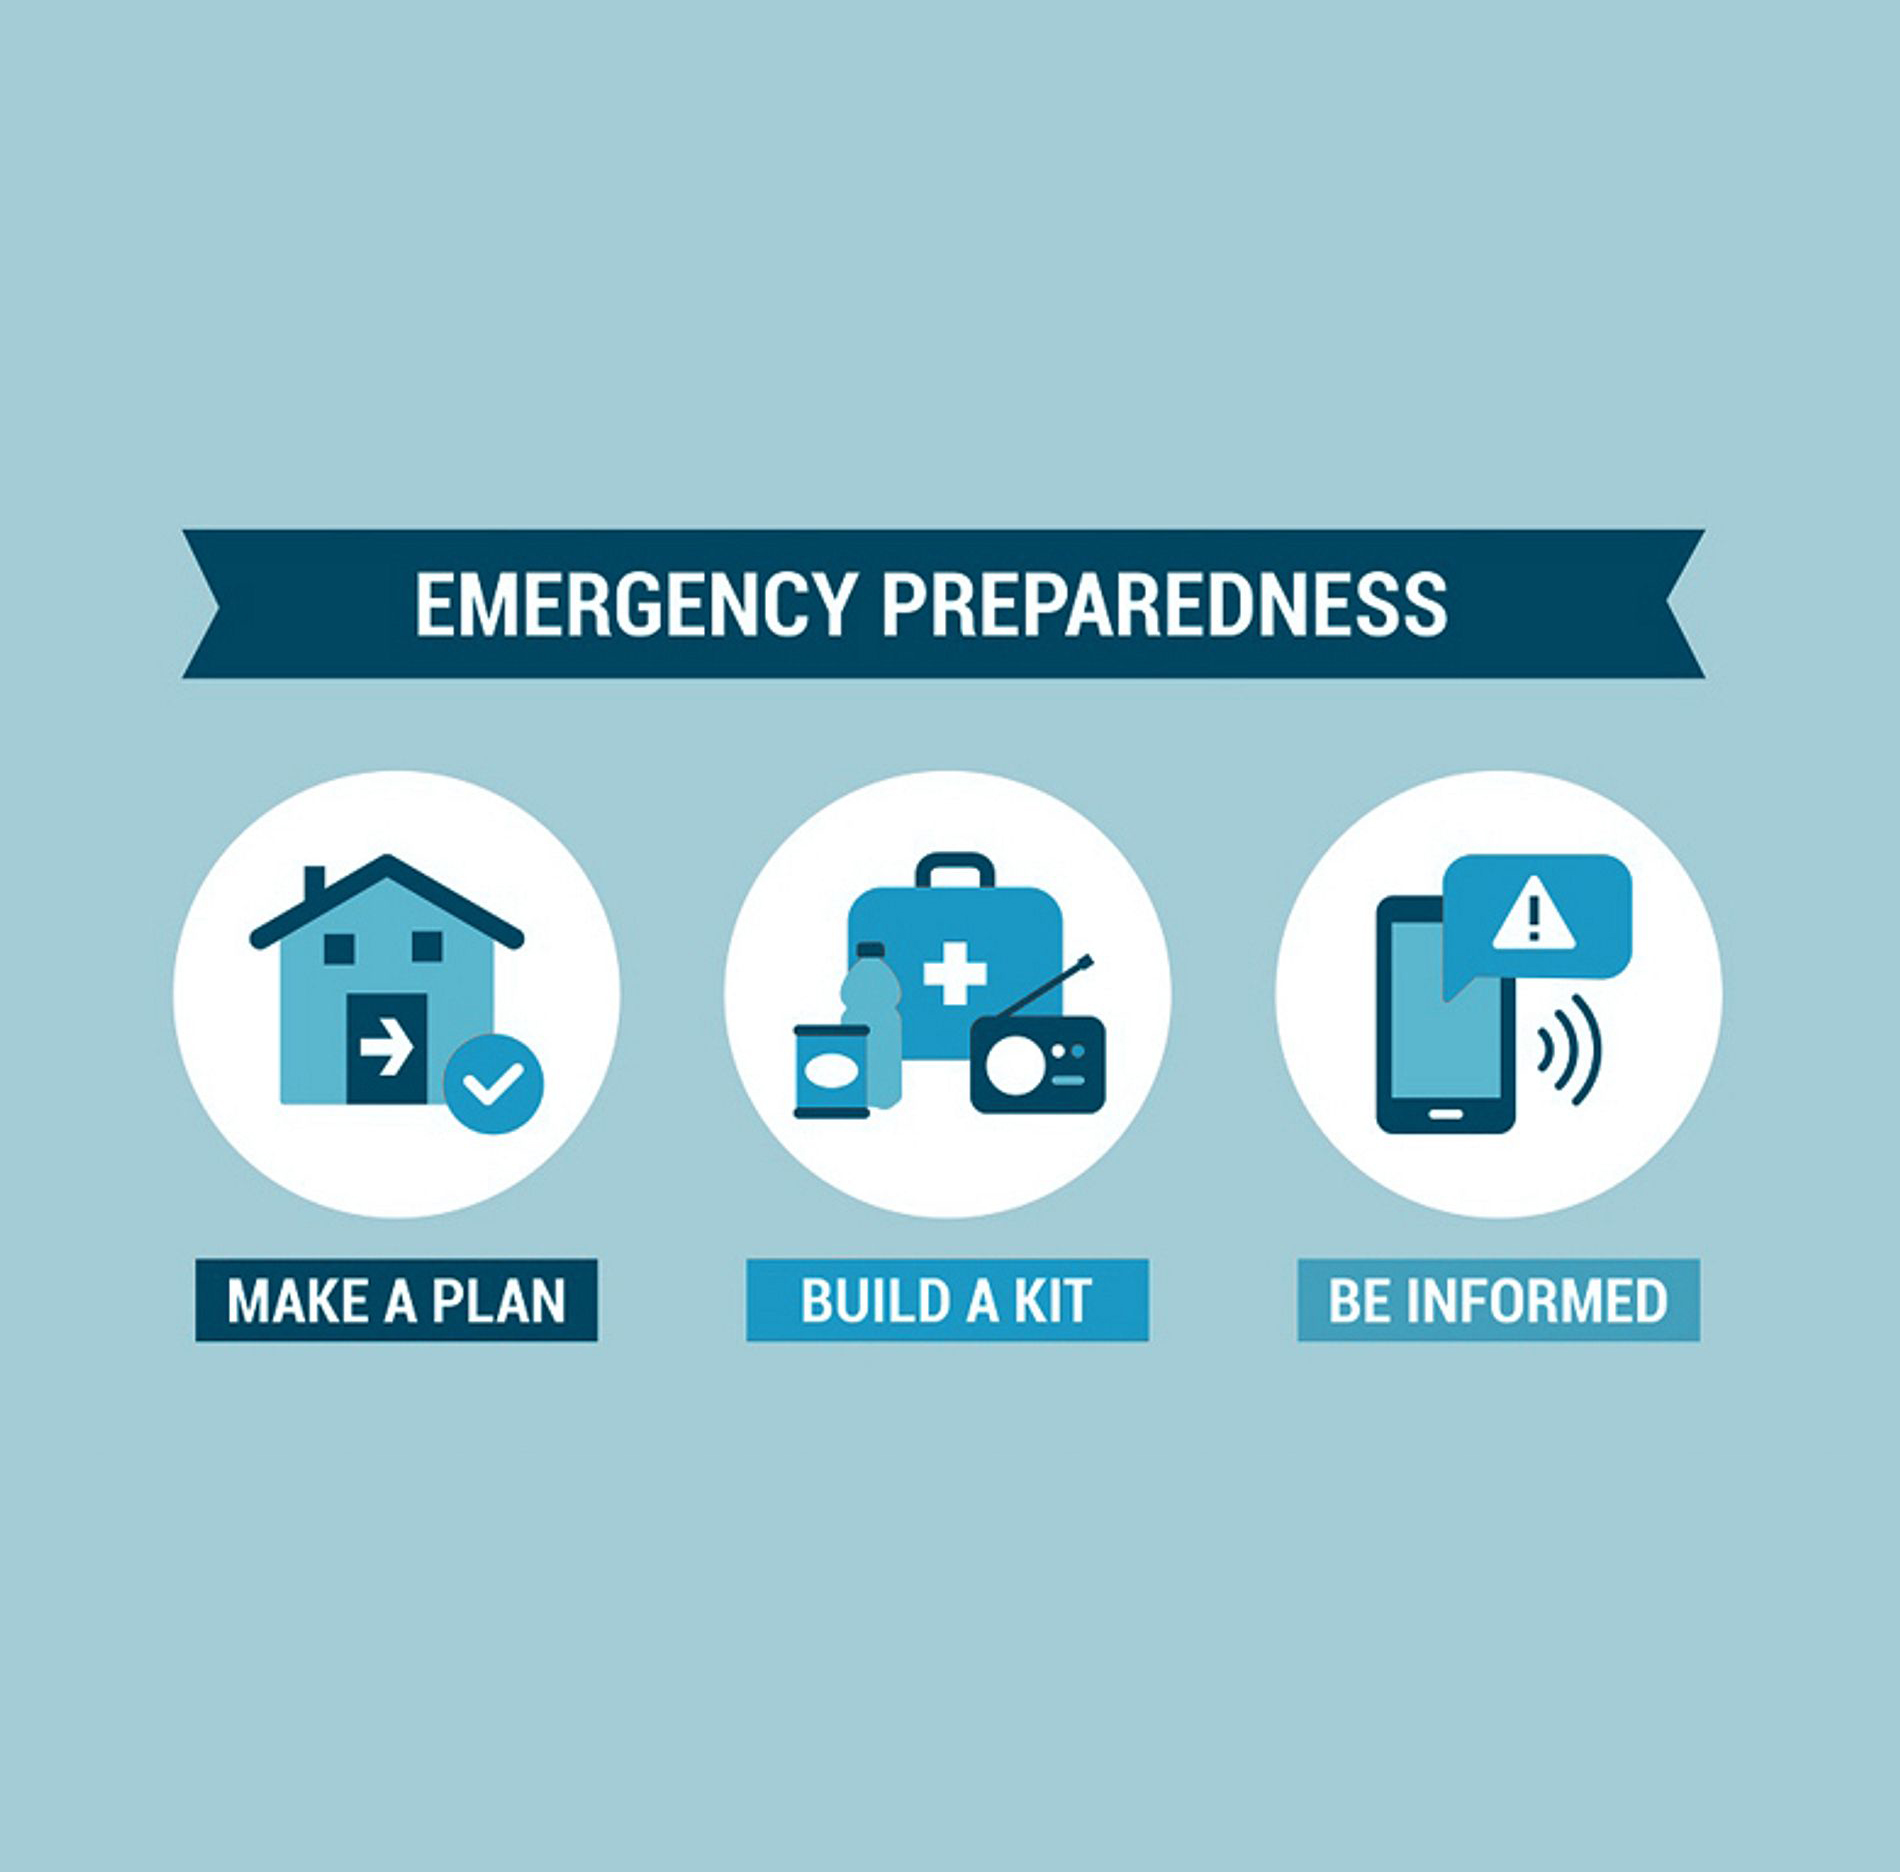 Prepare for Emergencies and Power Outages